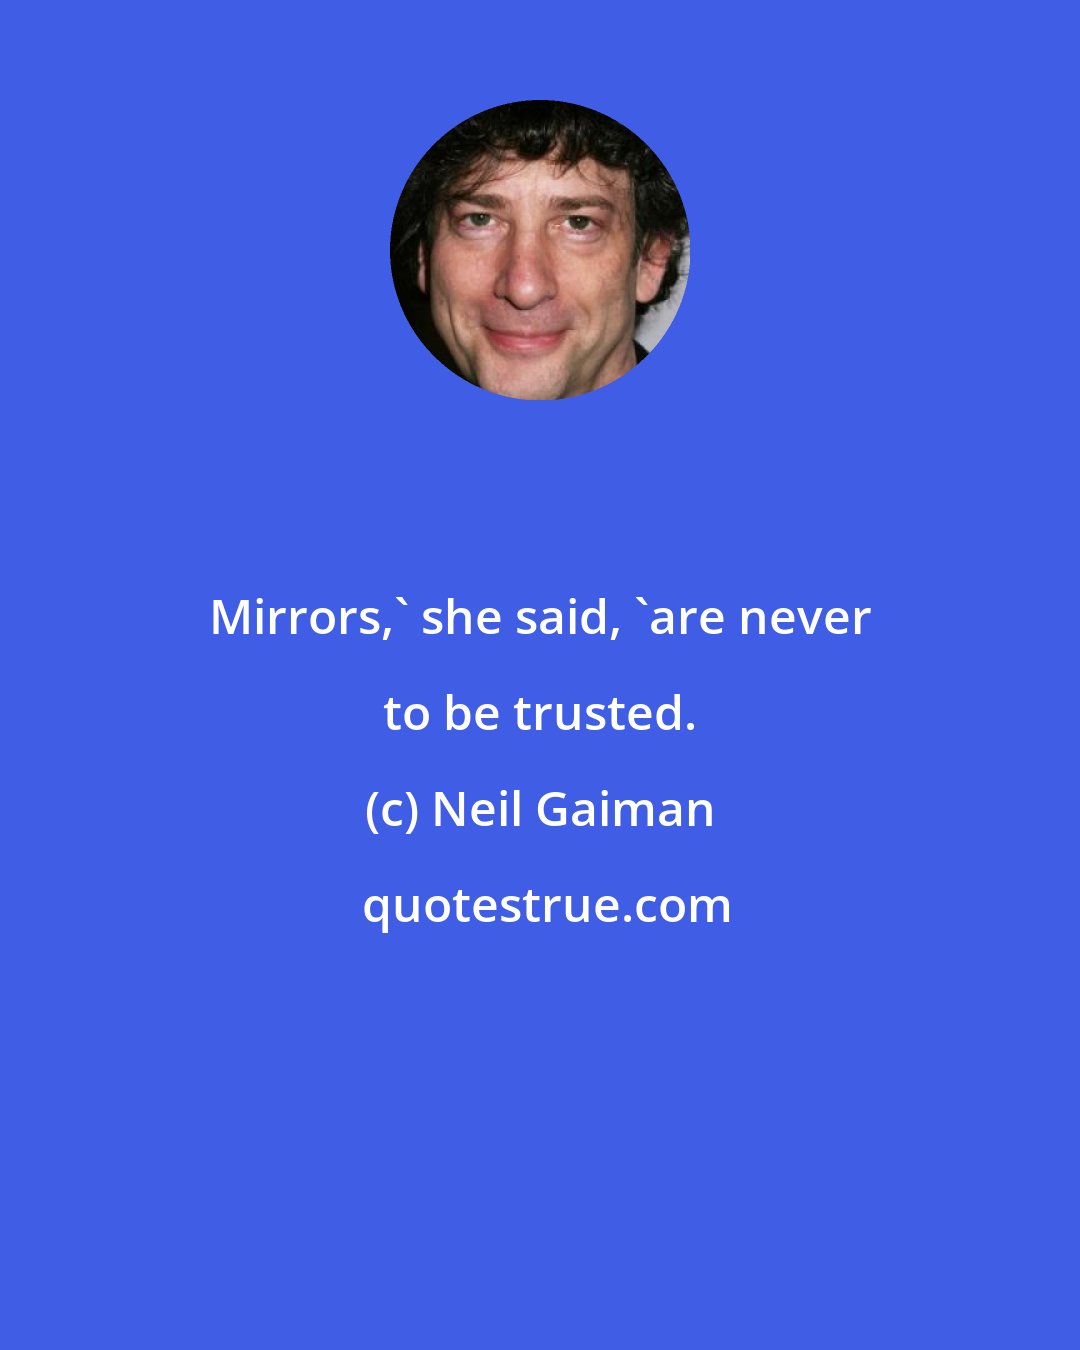 Neil Gaiman: Mirrors,' she said, 'are never to be trusted.